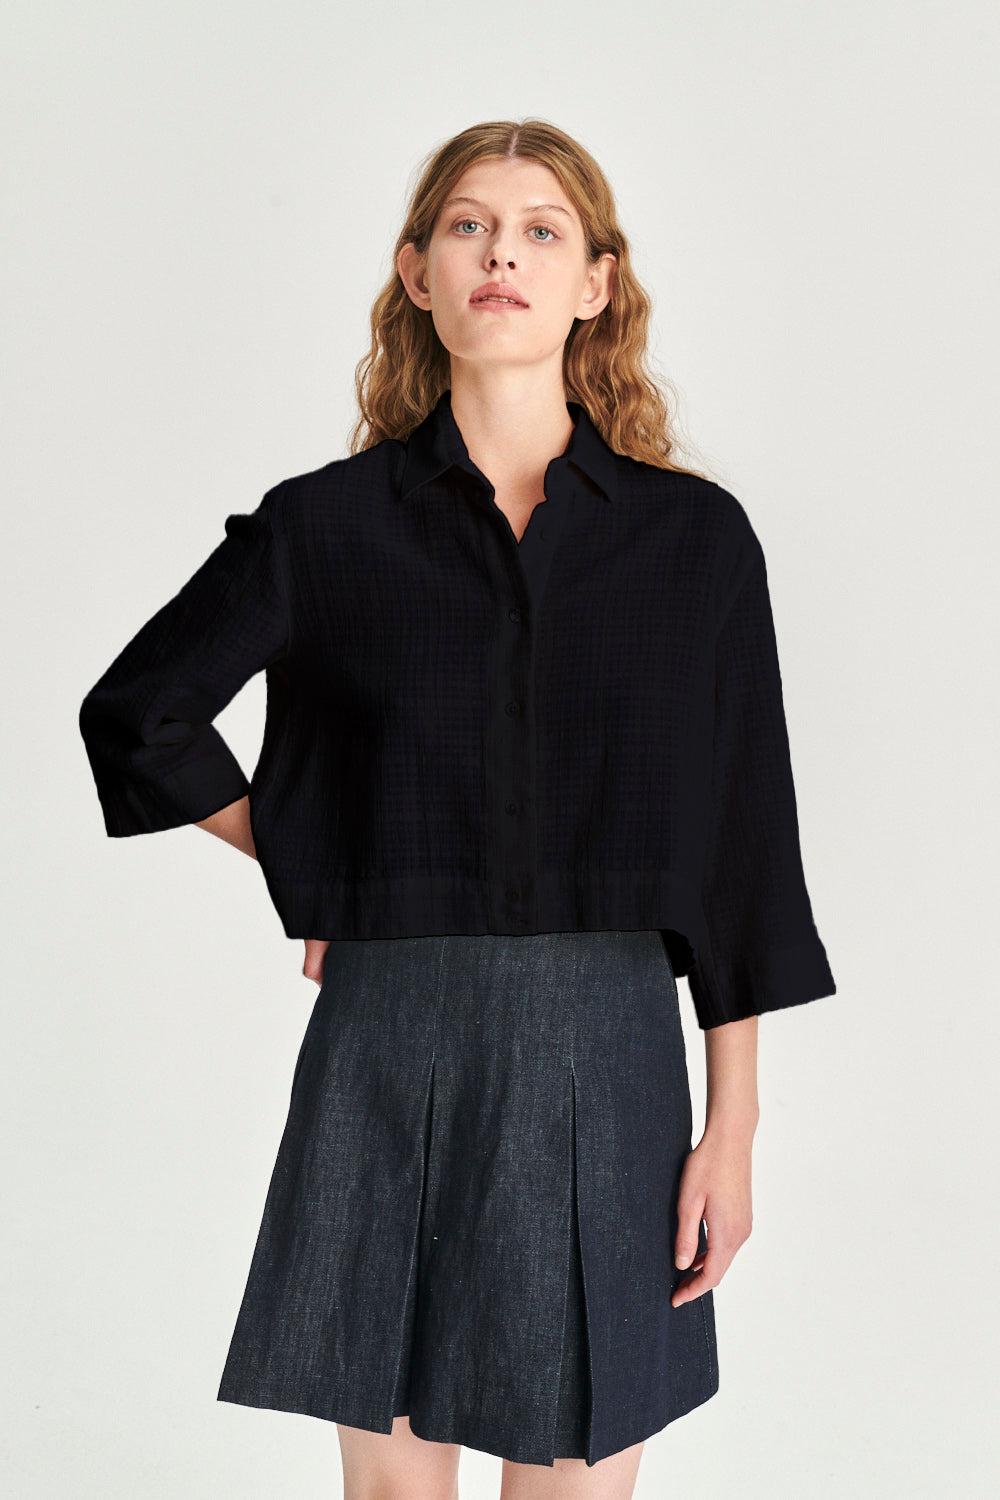 Blouse in the Finest Black Airy Portuguese Cotton